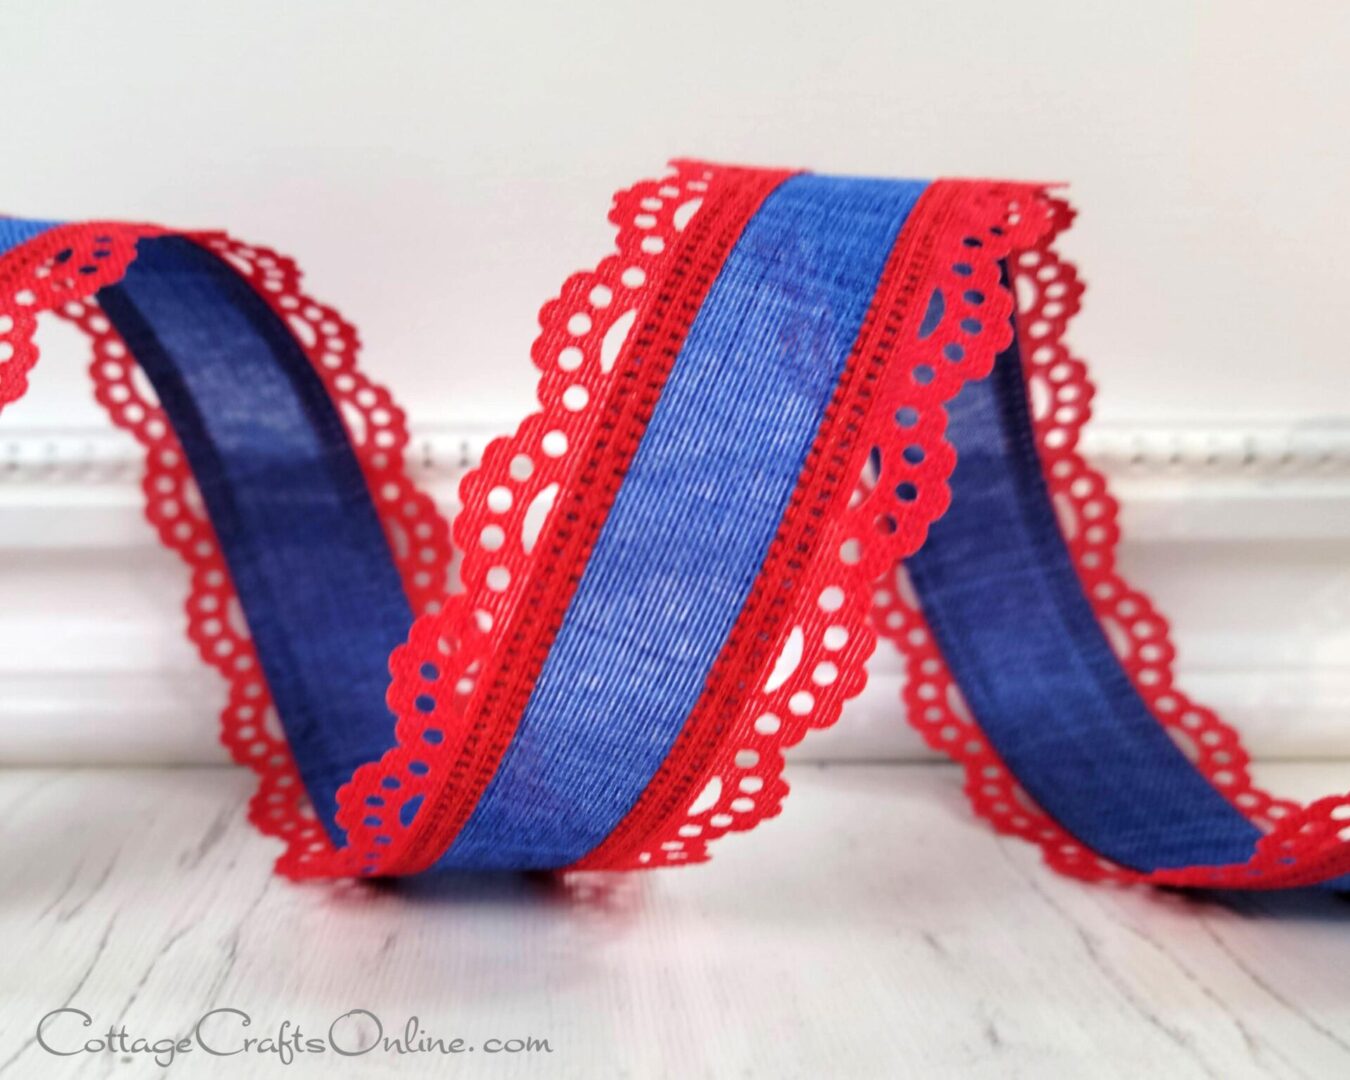 A red and blue ribbon sitting on top of a table.